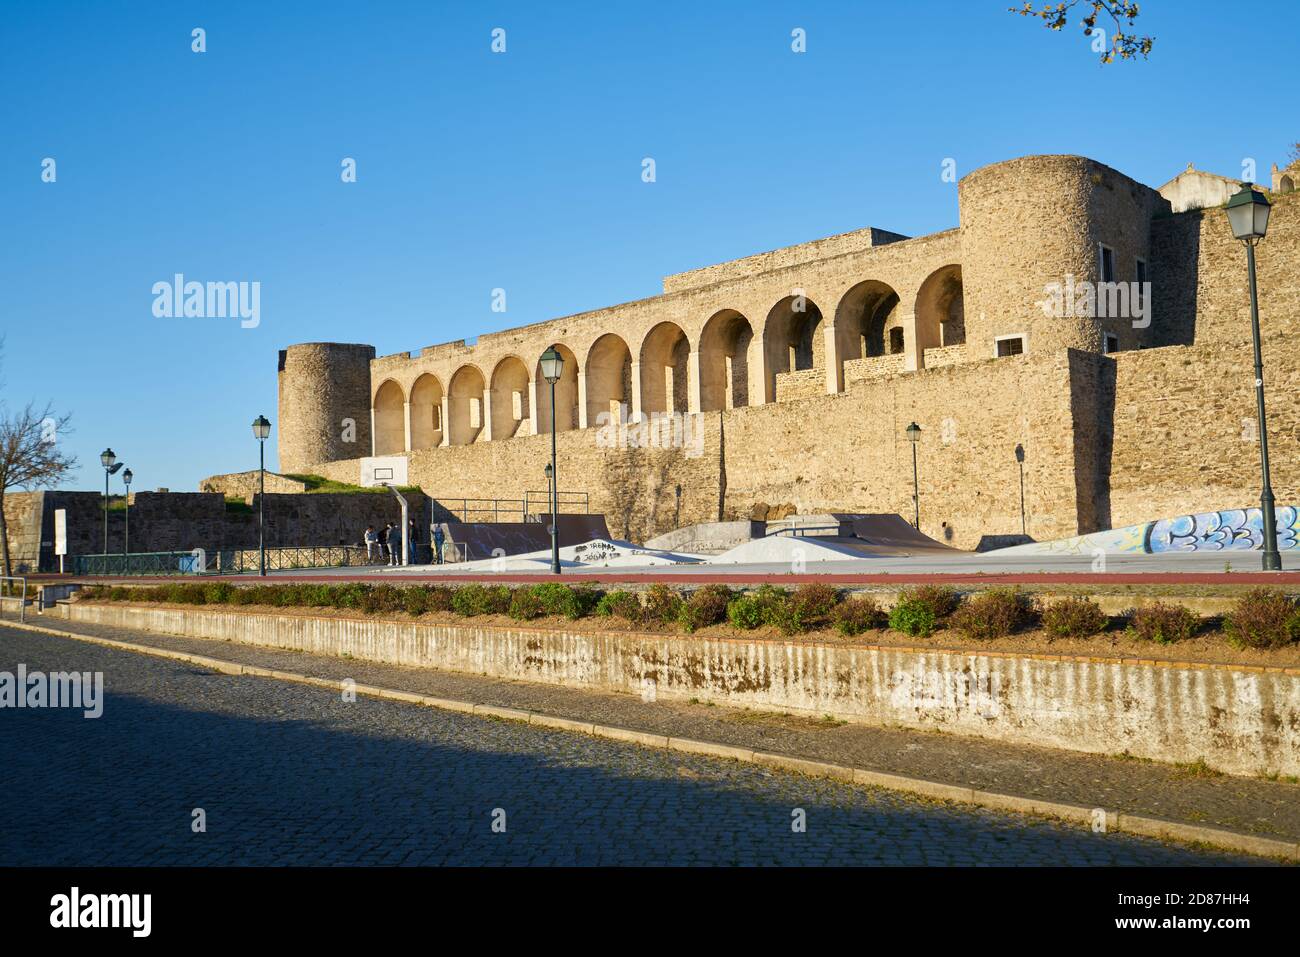 Abrantes castle with skate boarders, in Portugal Stock Photo